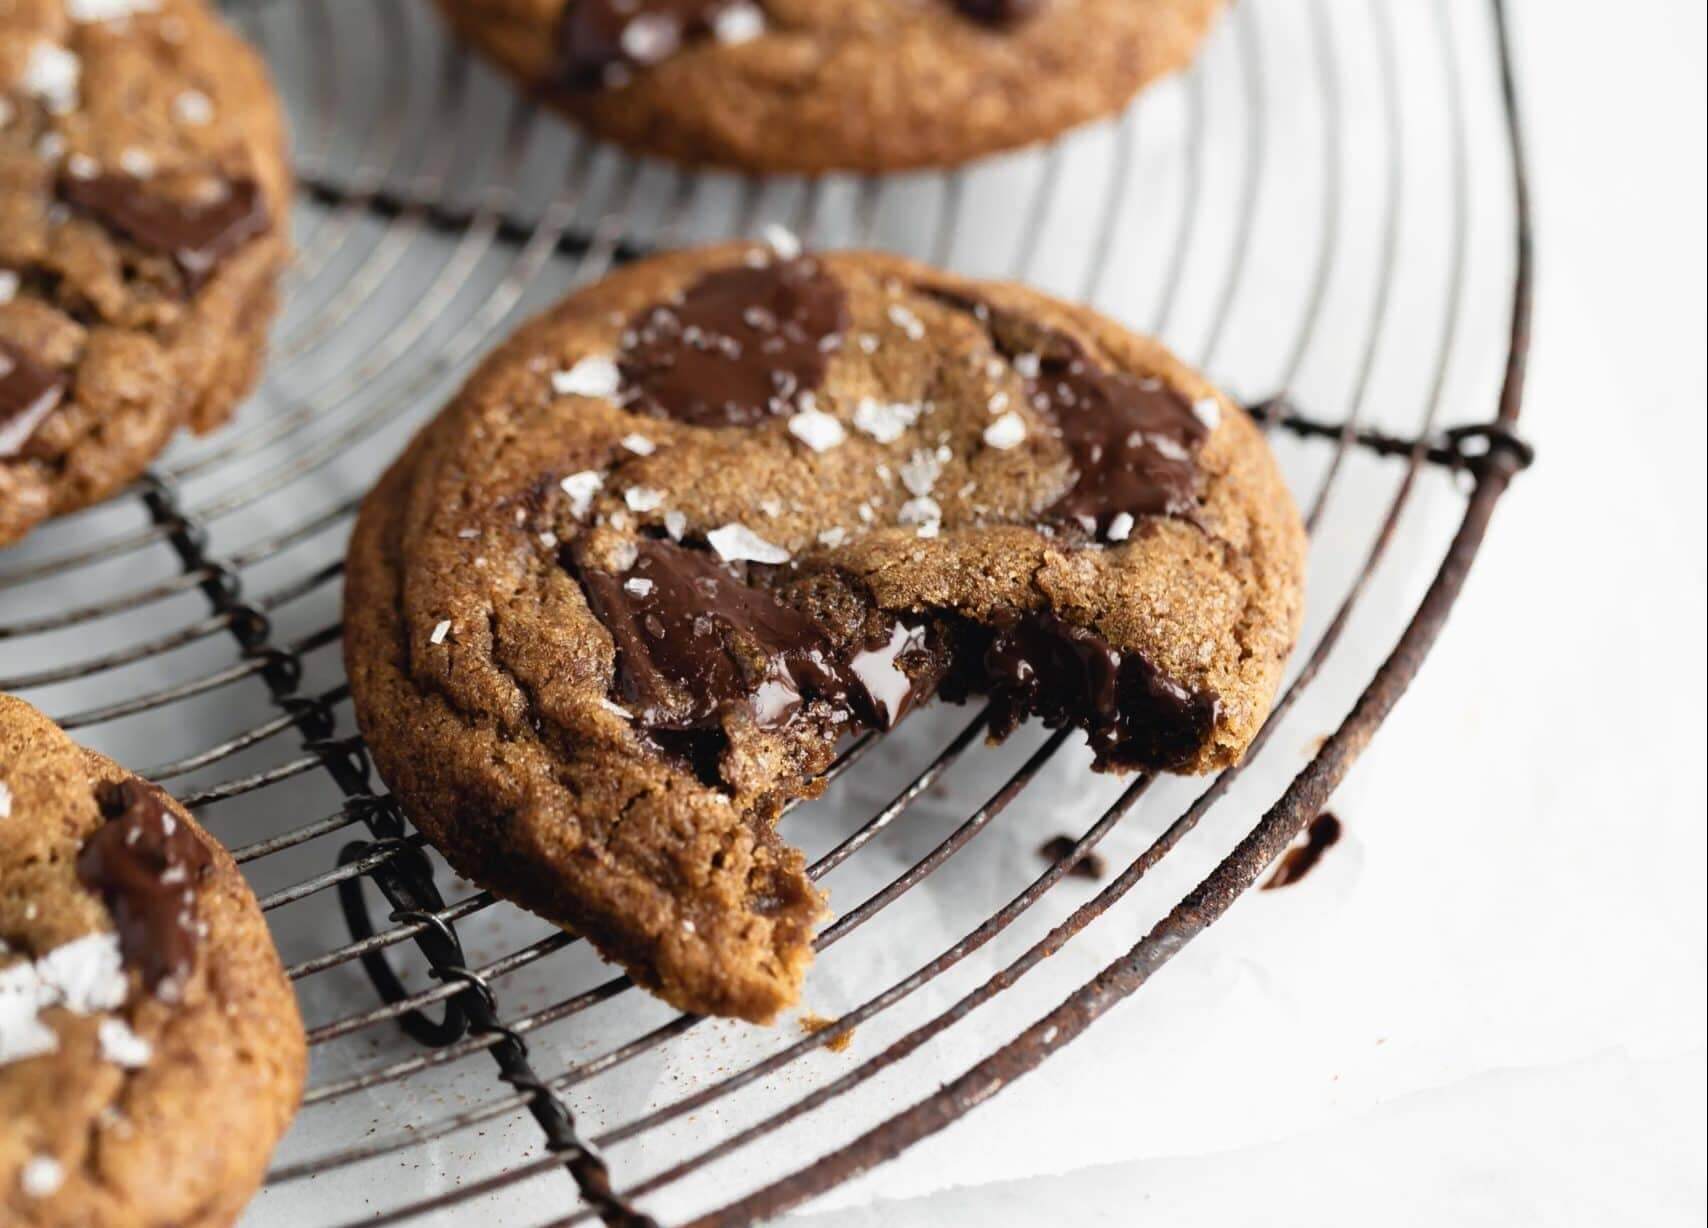 These caffeinated cookies are for adults only!